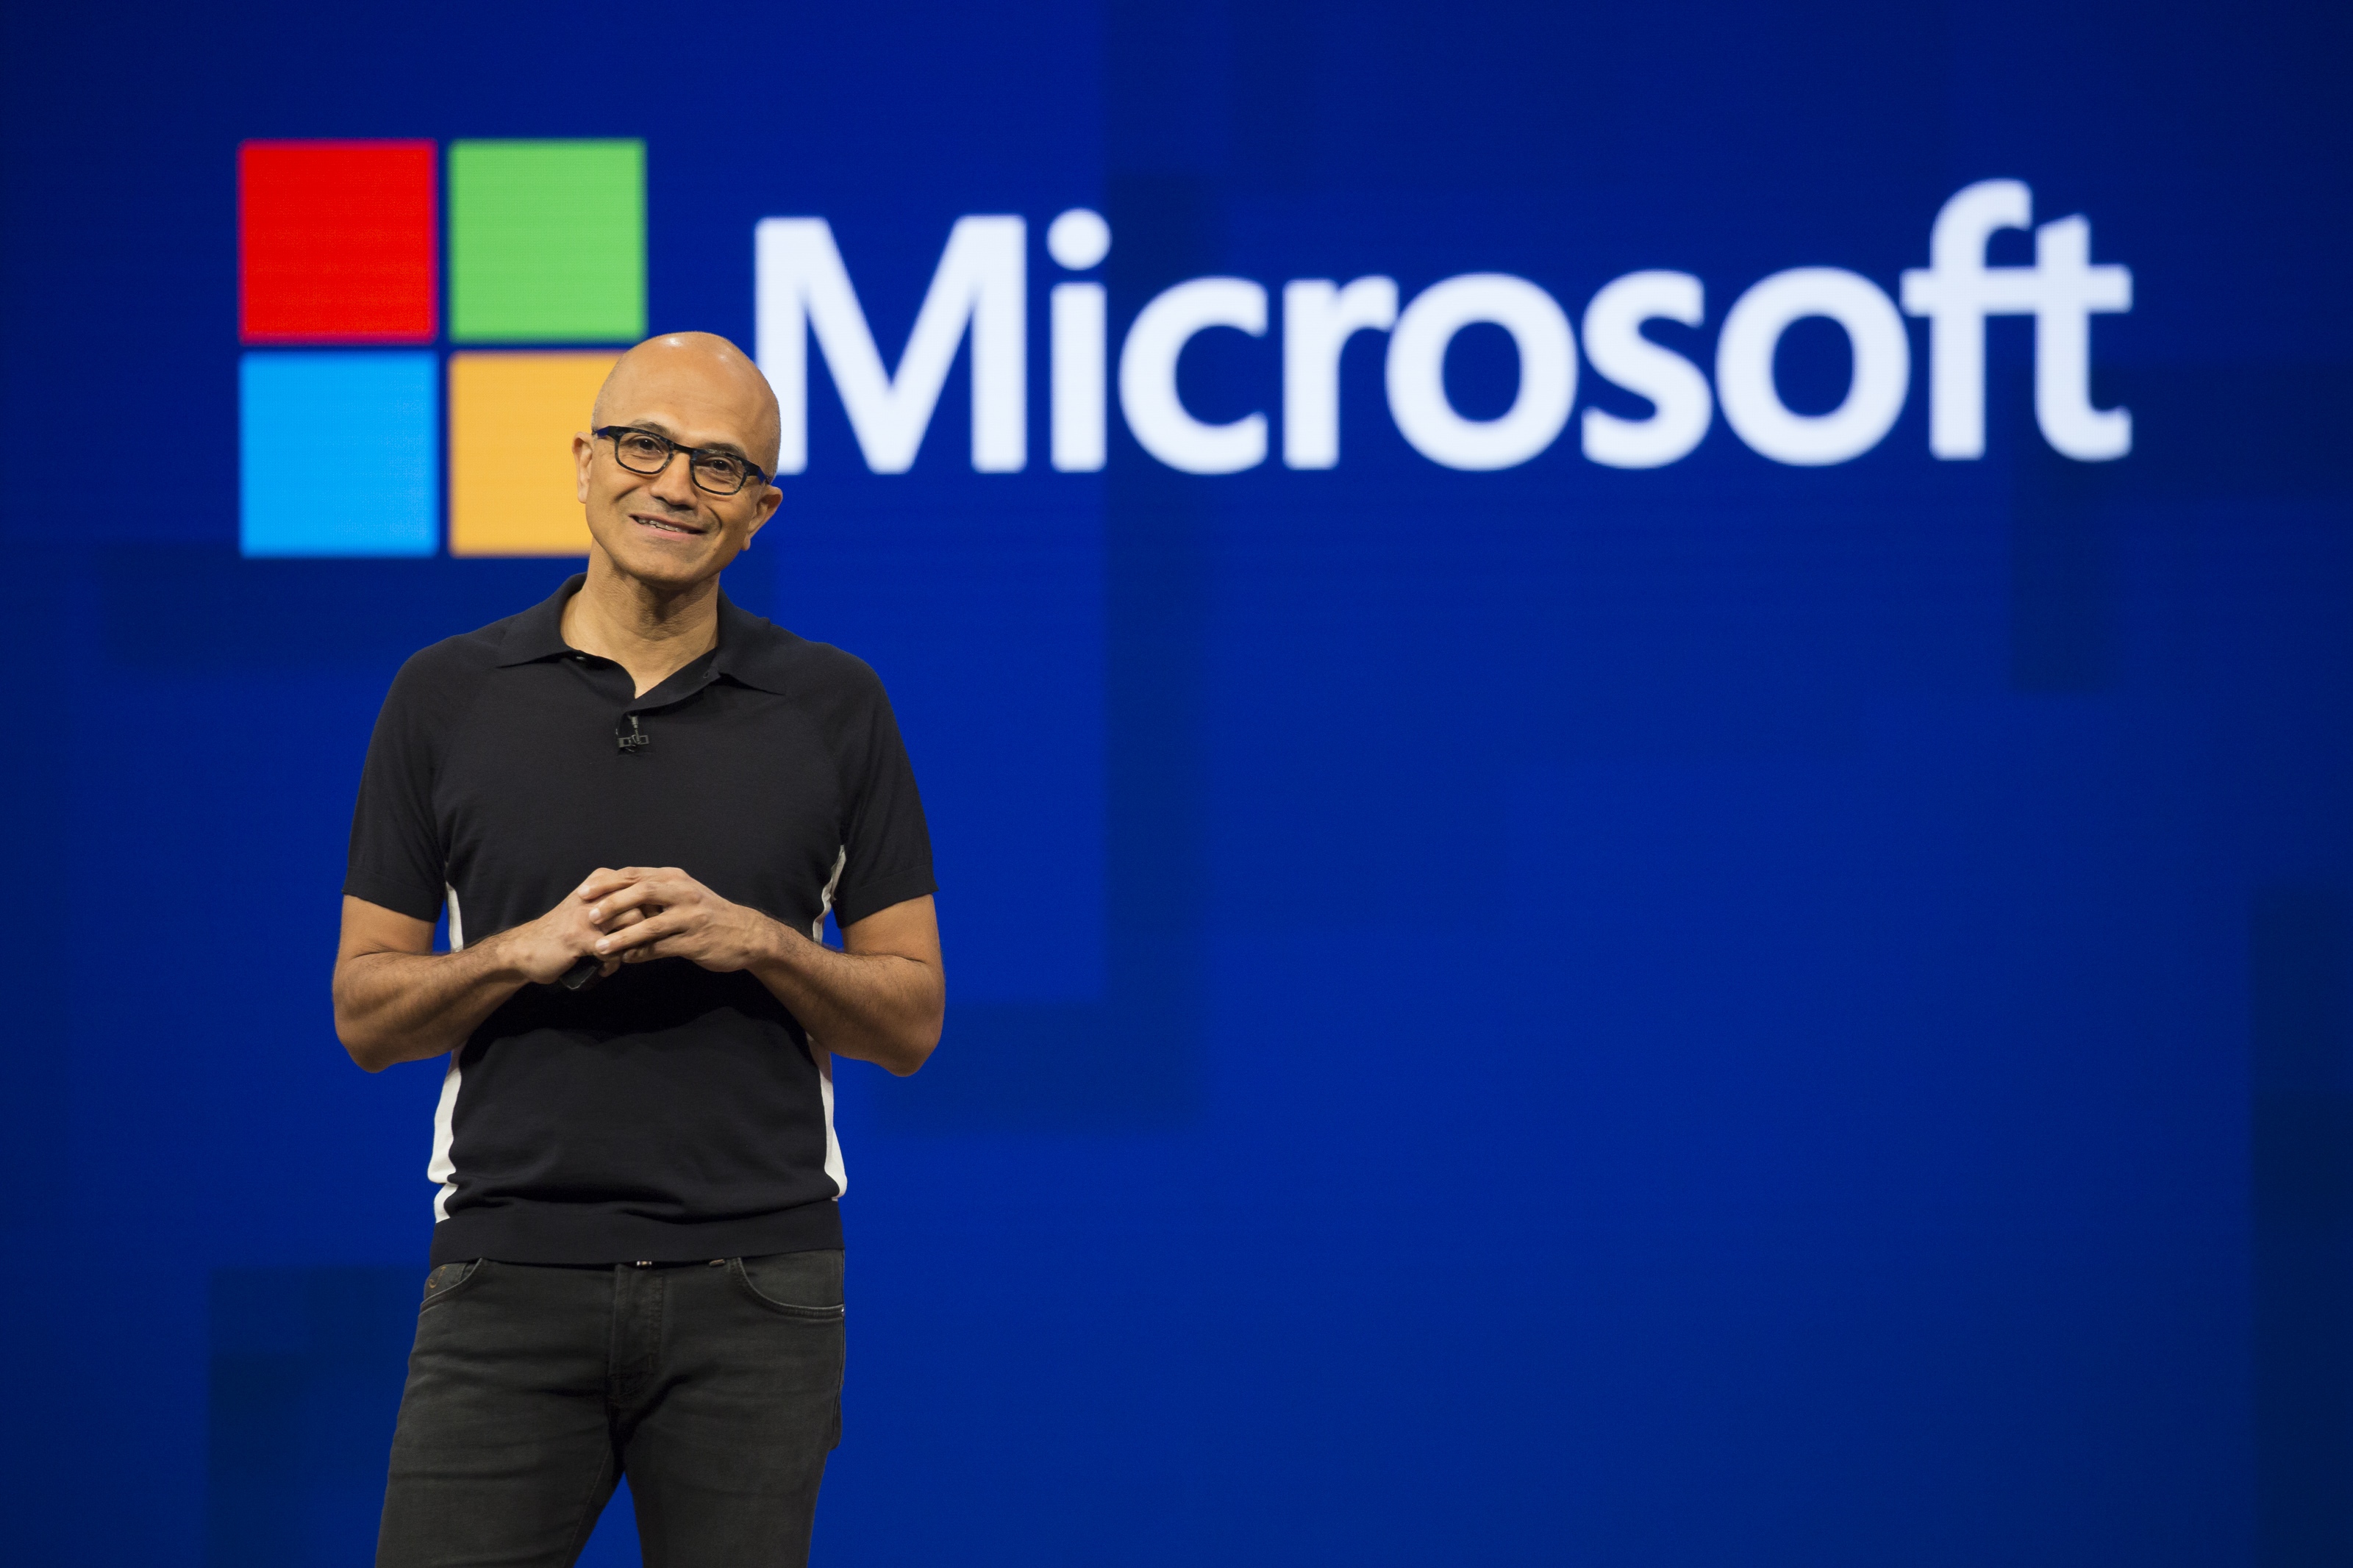 Satya Nadella, chief executive officer of Microsoft Corp., smiles during Microsoft Developers Build Conference in Seattle, Washington, U.S., on Wednesday, May 10, 2017. (Bloomberg&mdash;Bloomberg via Getty Images)